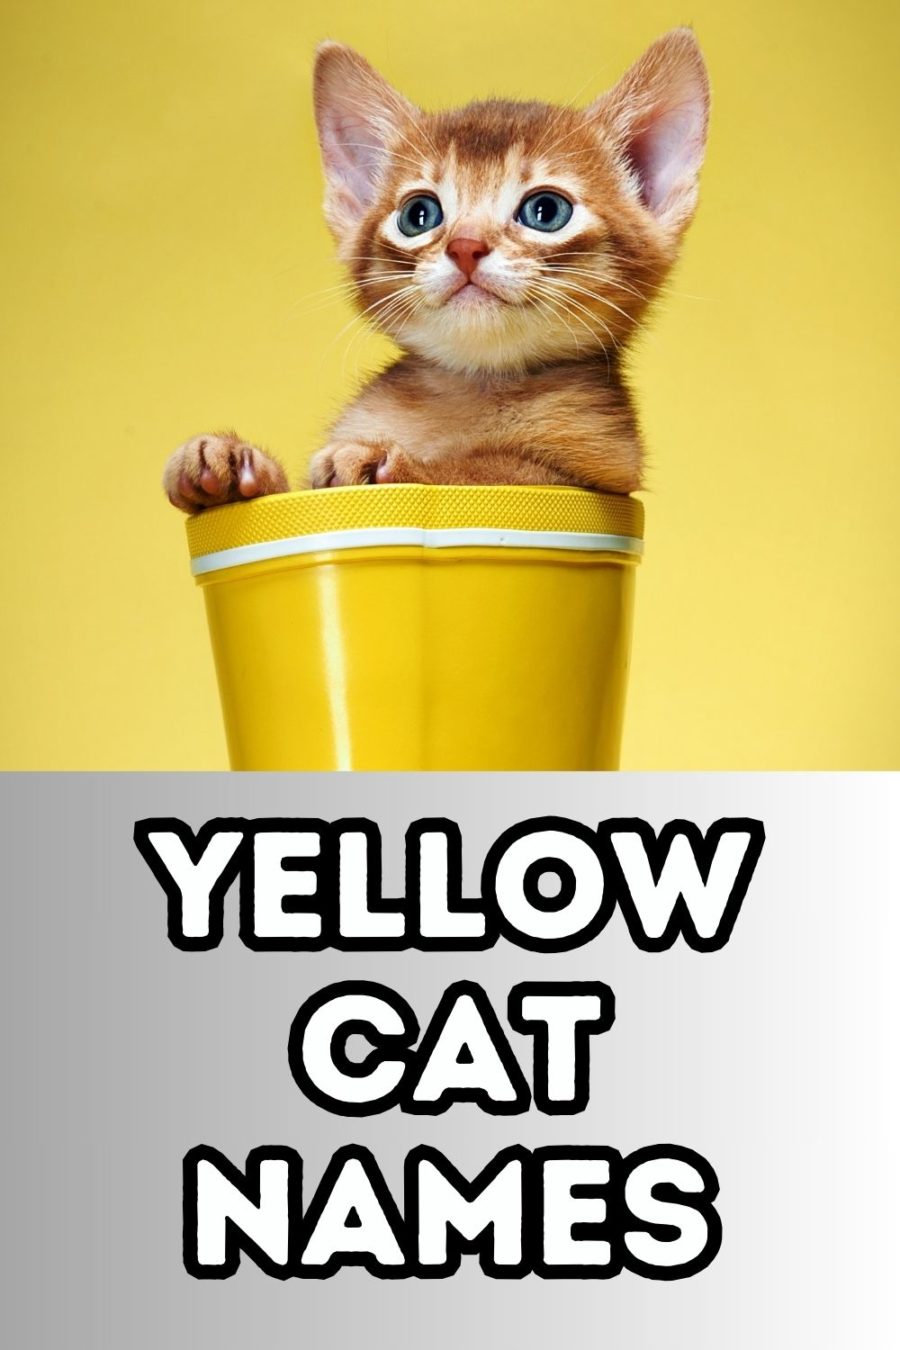 yellow kitten sitting in yellow cup in top half of image with "yellow cat names" in lower half of image